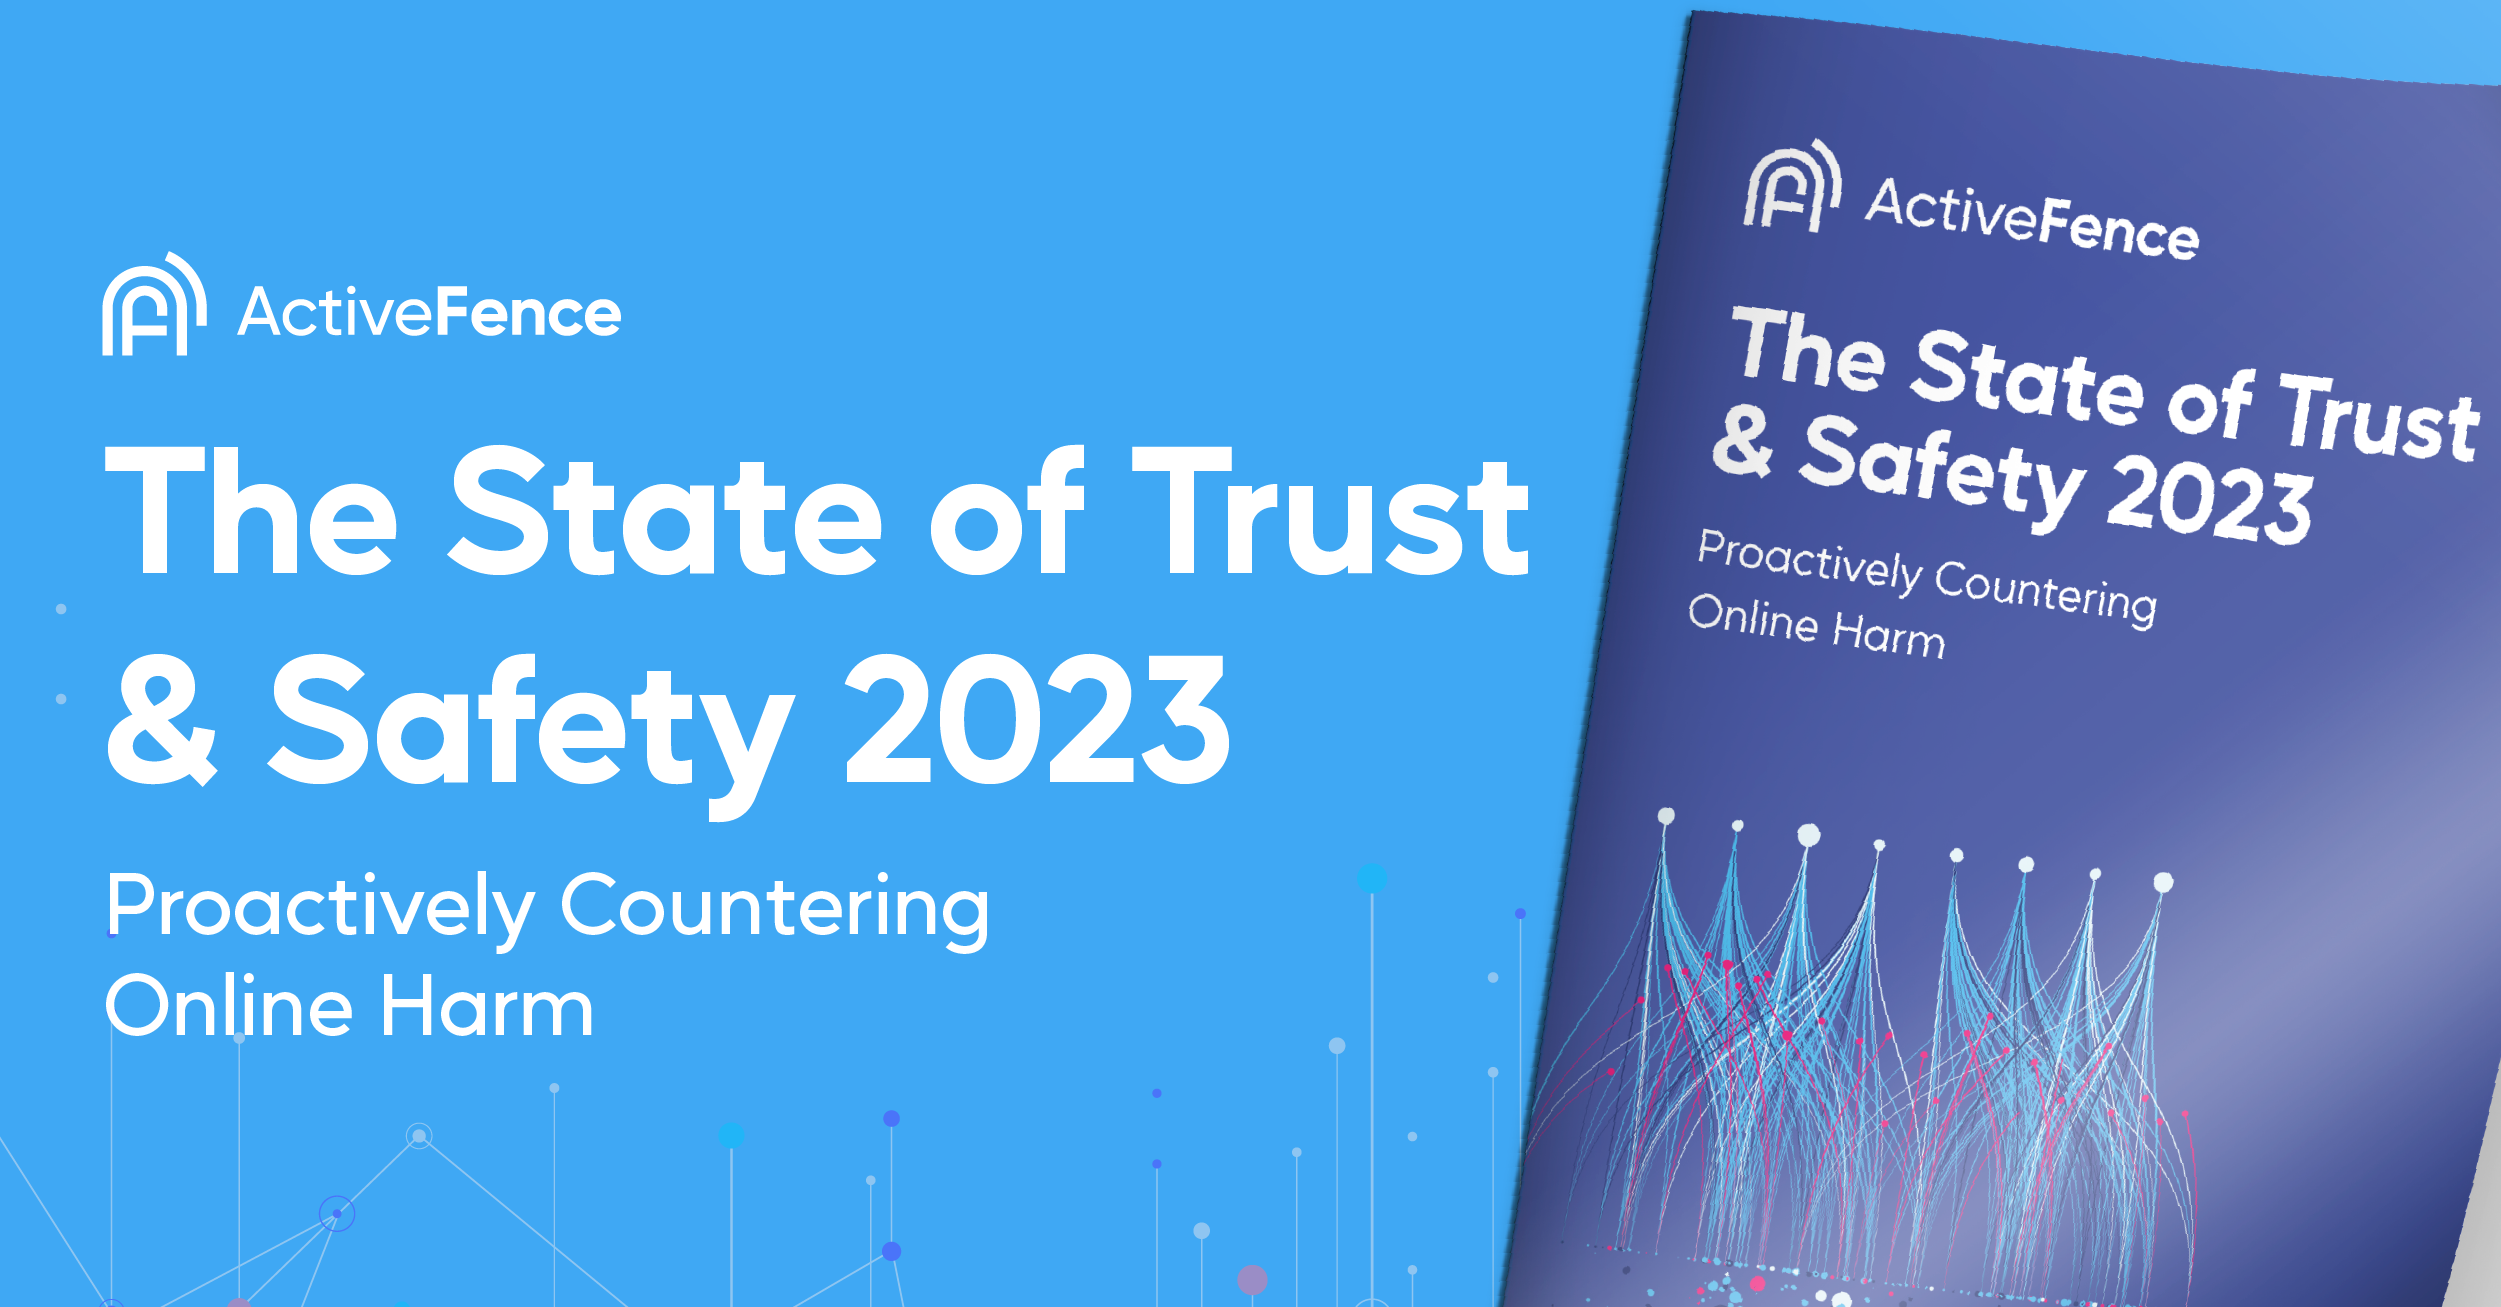 The State of Trust & Safety 2023 Report A Defining Moment ActiveFence